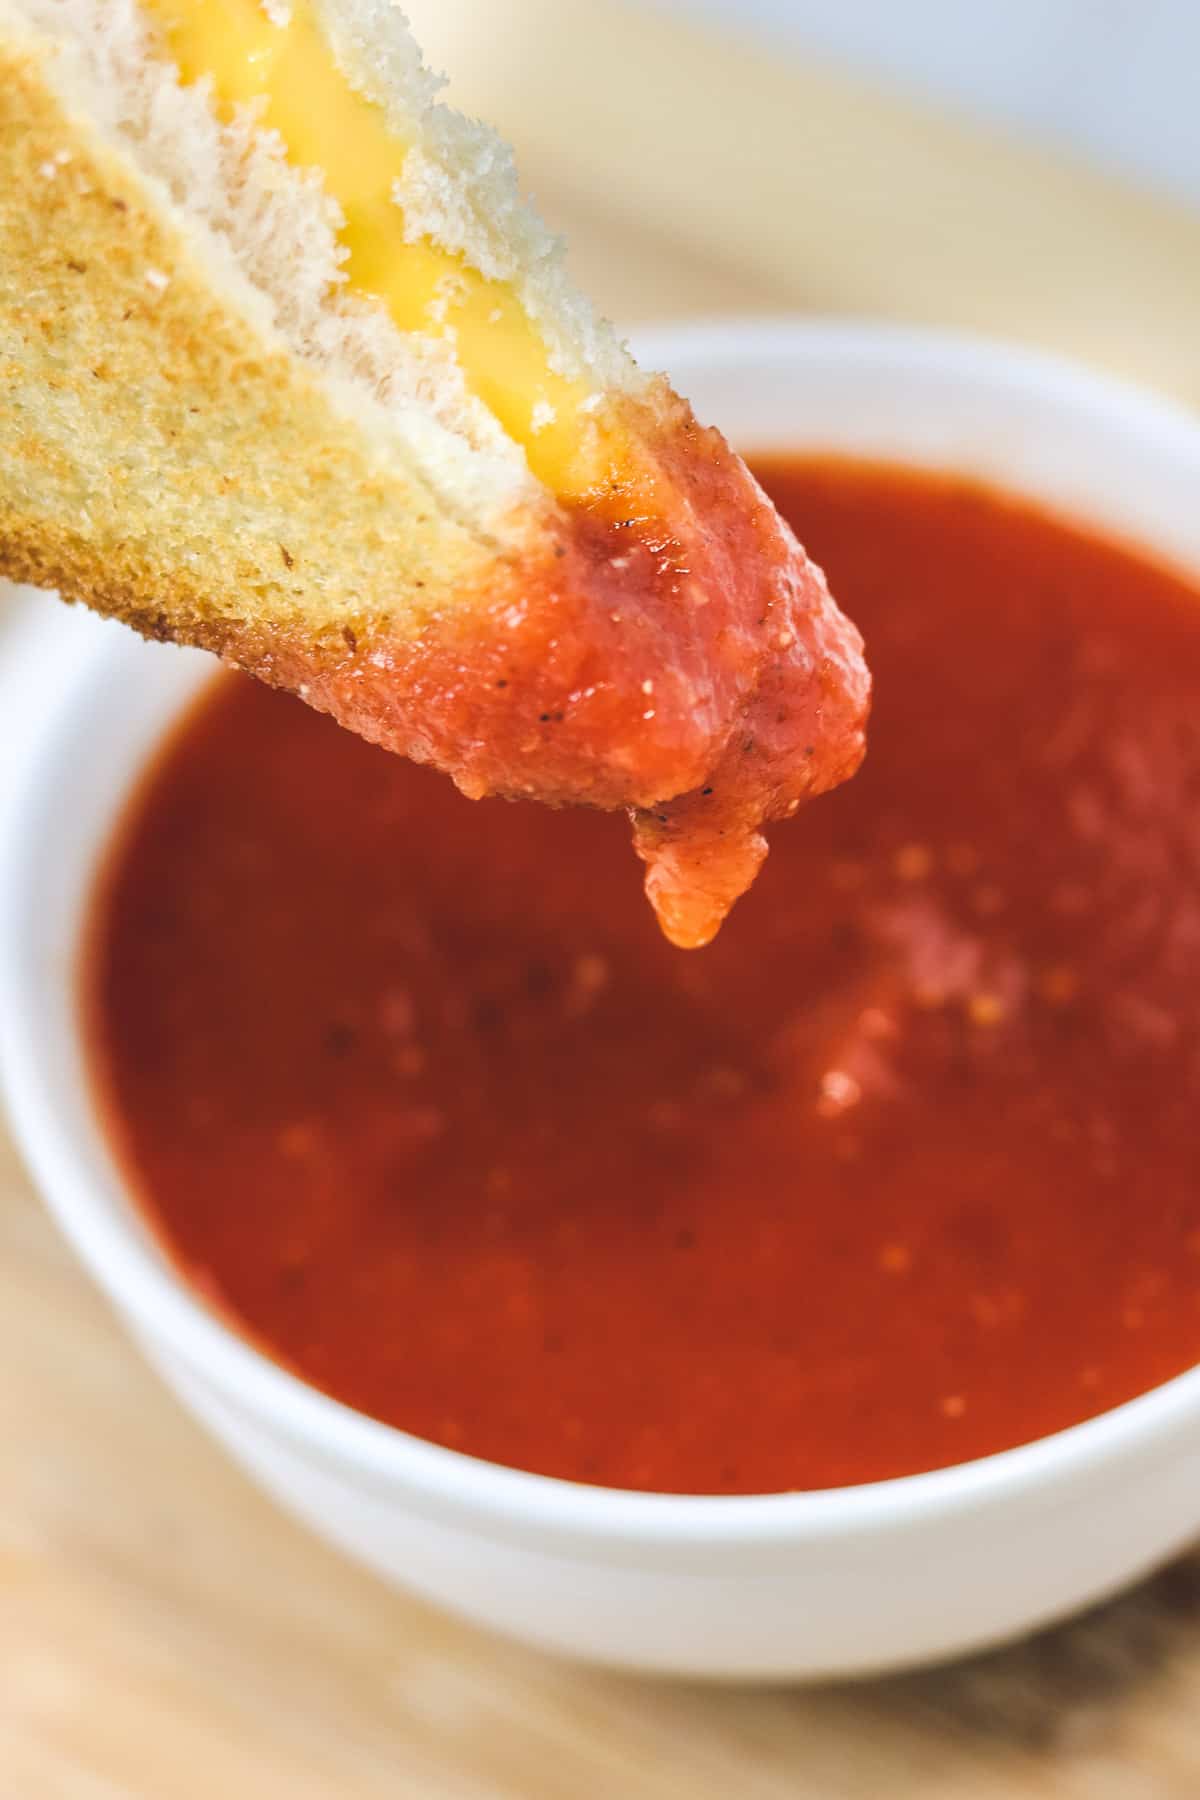 dipping a grilled cheese in tomato soup